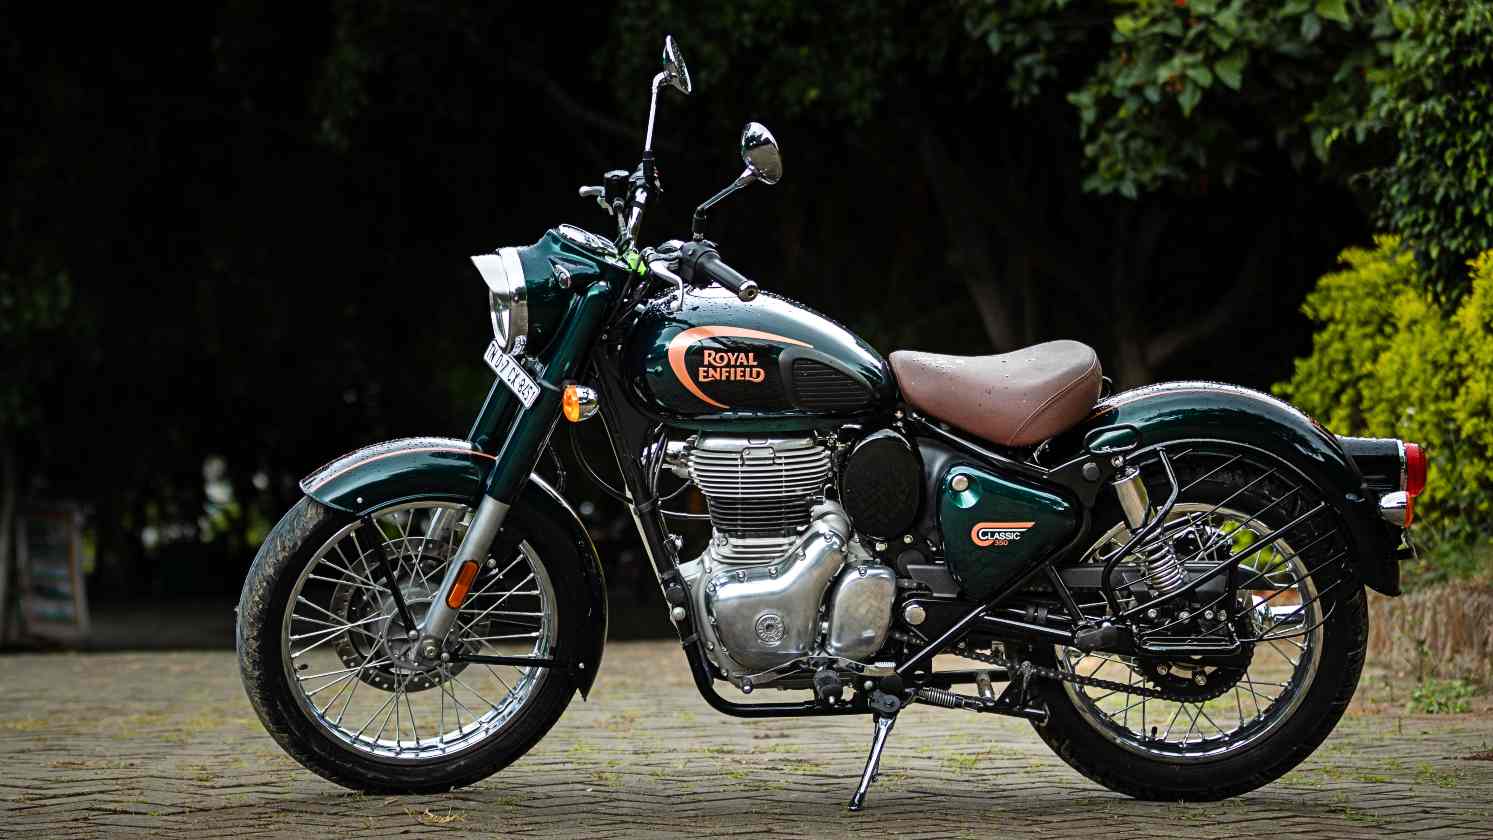 The design and styling elements that have endeared the Classic 350 to many are still in place with the 2022 iteration. Image: Royal Enfield